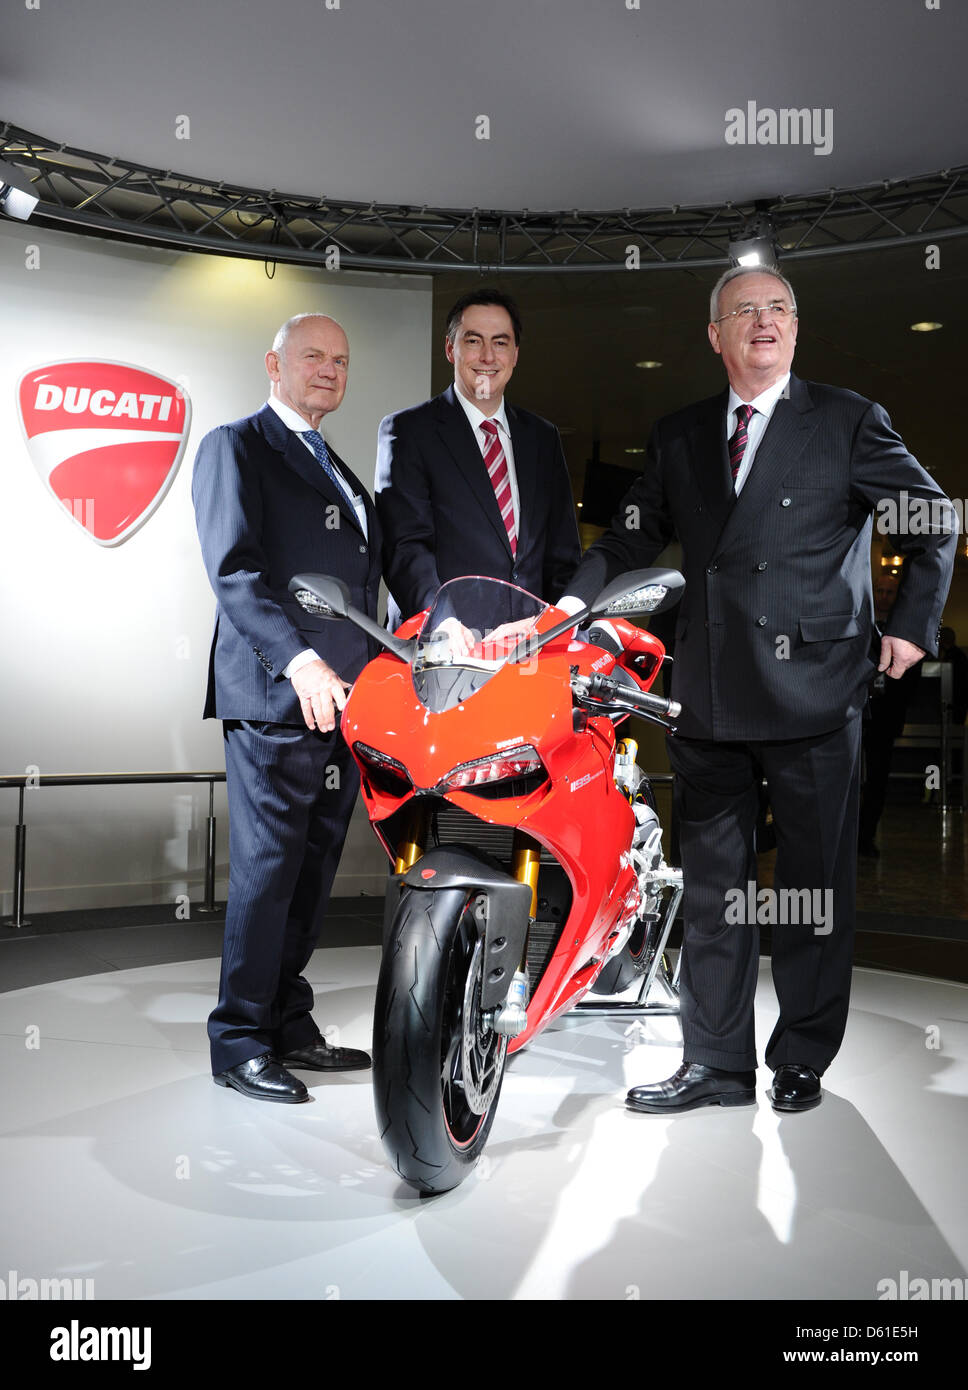 Chairman of the Volkswagen Managing Board Martin Winterkorn (R-L), Lower Saxonian Prime Minister David McAllister and chairman of Volkswagen Supervisory Board Ferdinand Piech stand next to a Ducati Panigale motorbike prior to the general meeting of car manufacturer  Volkswagen in Hamburg, Germany, 19 April 2012. Ursula Piech will be elected to the supervisory board during the meeti Stock Photo